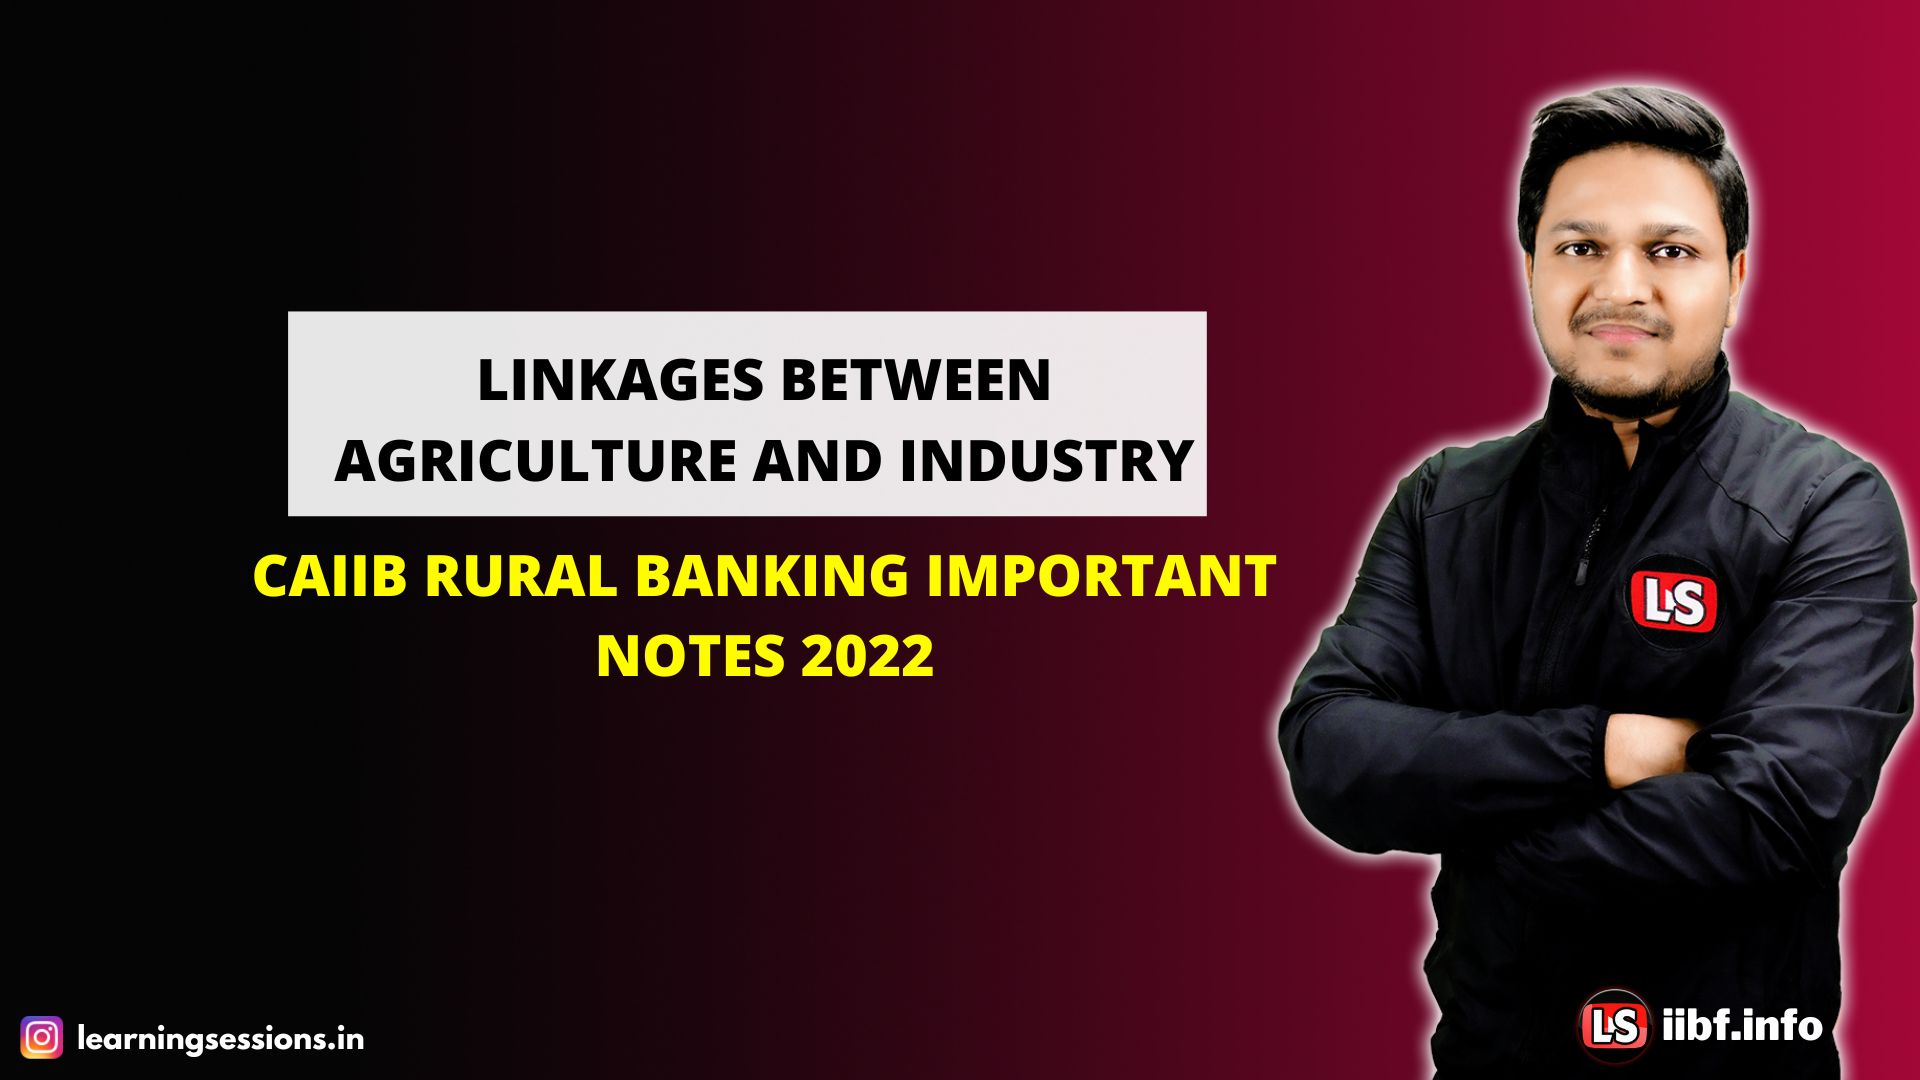 LINKAGES BETWEEN AGRICULTURE AND INDUSTRY | CAIIB RURAL BANKING IMPORTANT NOTES 2022